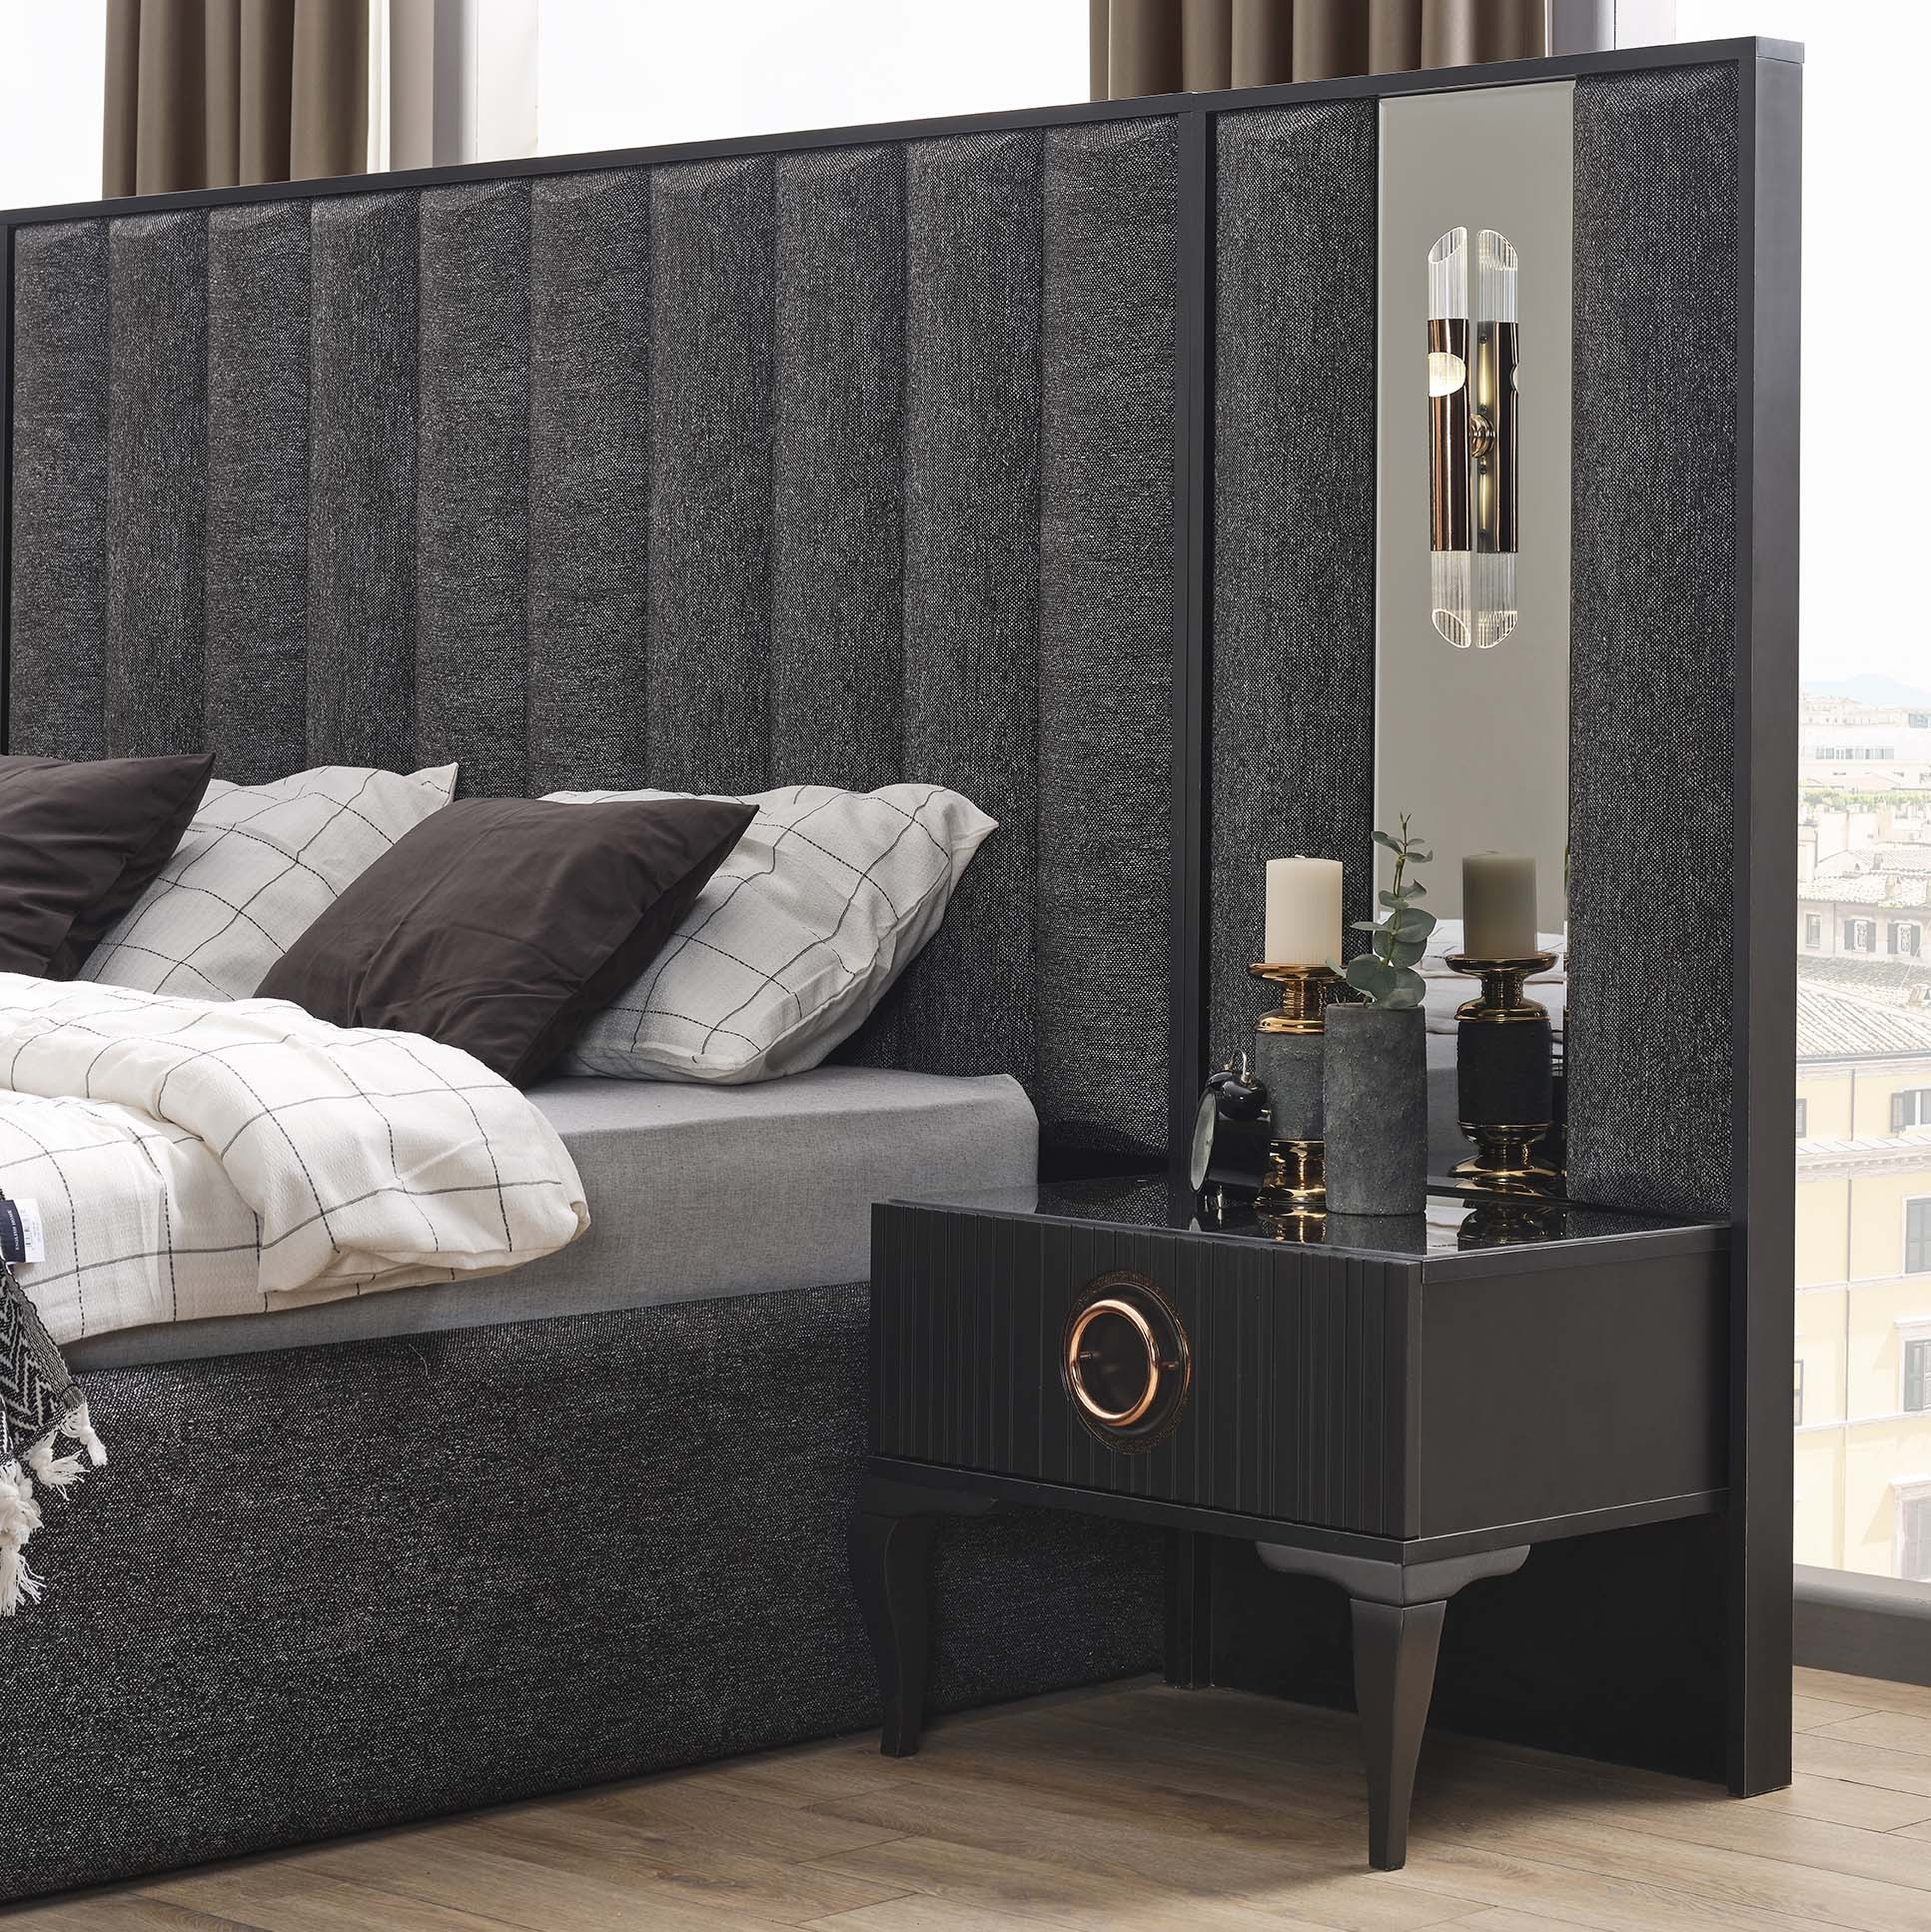 Style Larissa Bedroom Vol2 (Bed Without Storage 160x200cm)